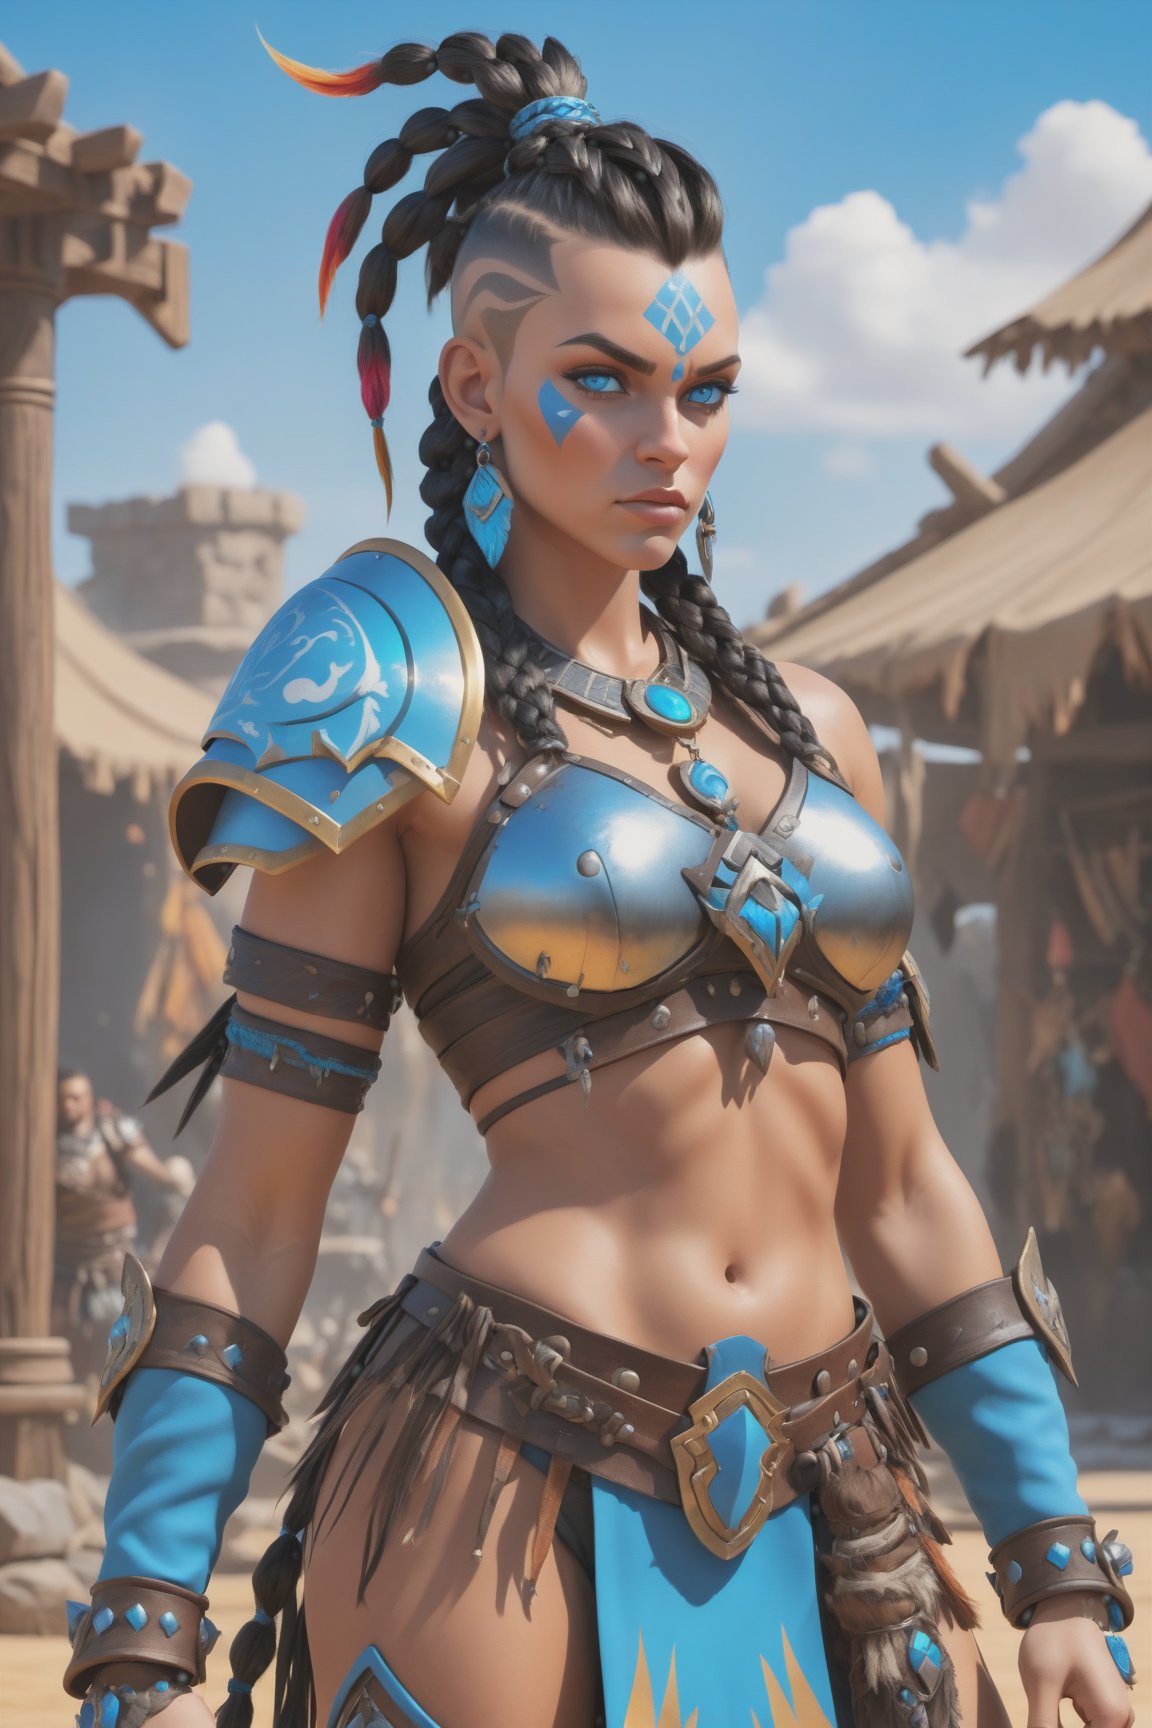 (best quality), (4K, HDR), barbarian junker queen, tall woman, black mohawk hair braids, strong body, bright blue eyes, (different camera angles), fantasy style armor and clothing, fantasy, vibrant colors, 